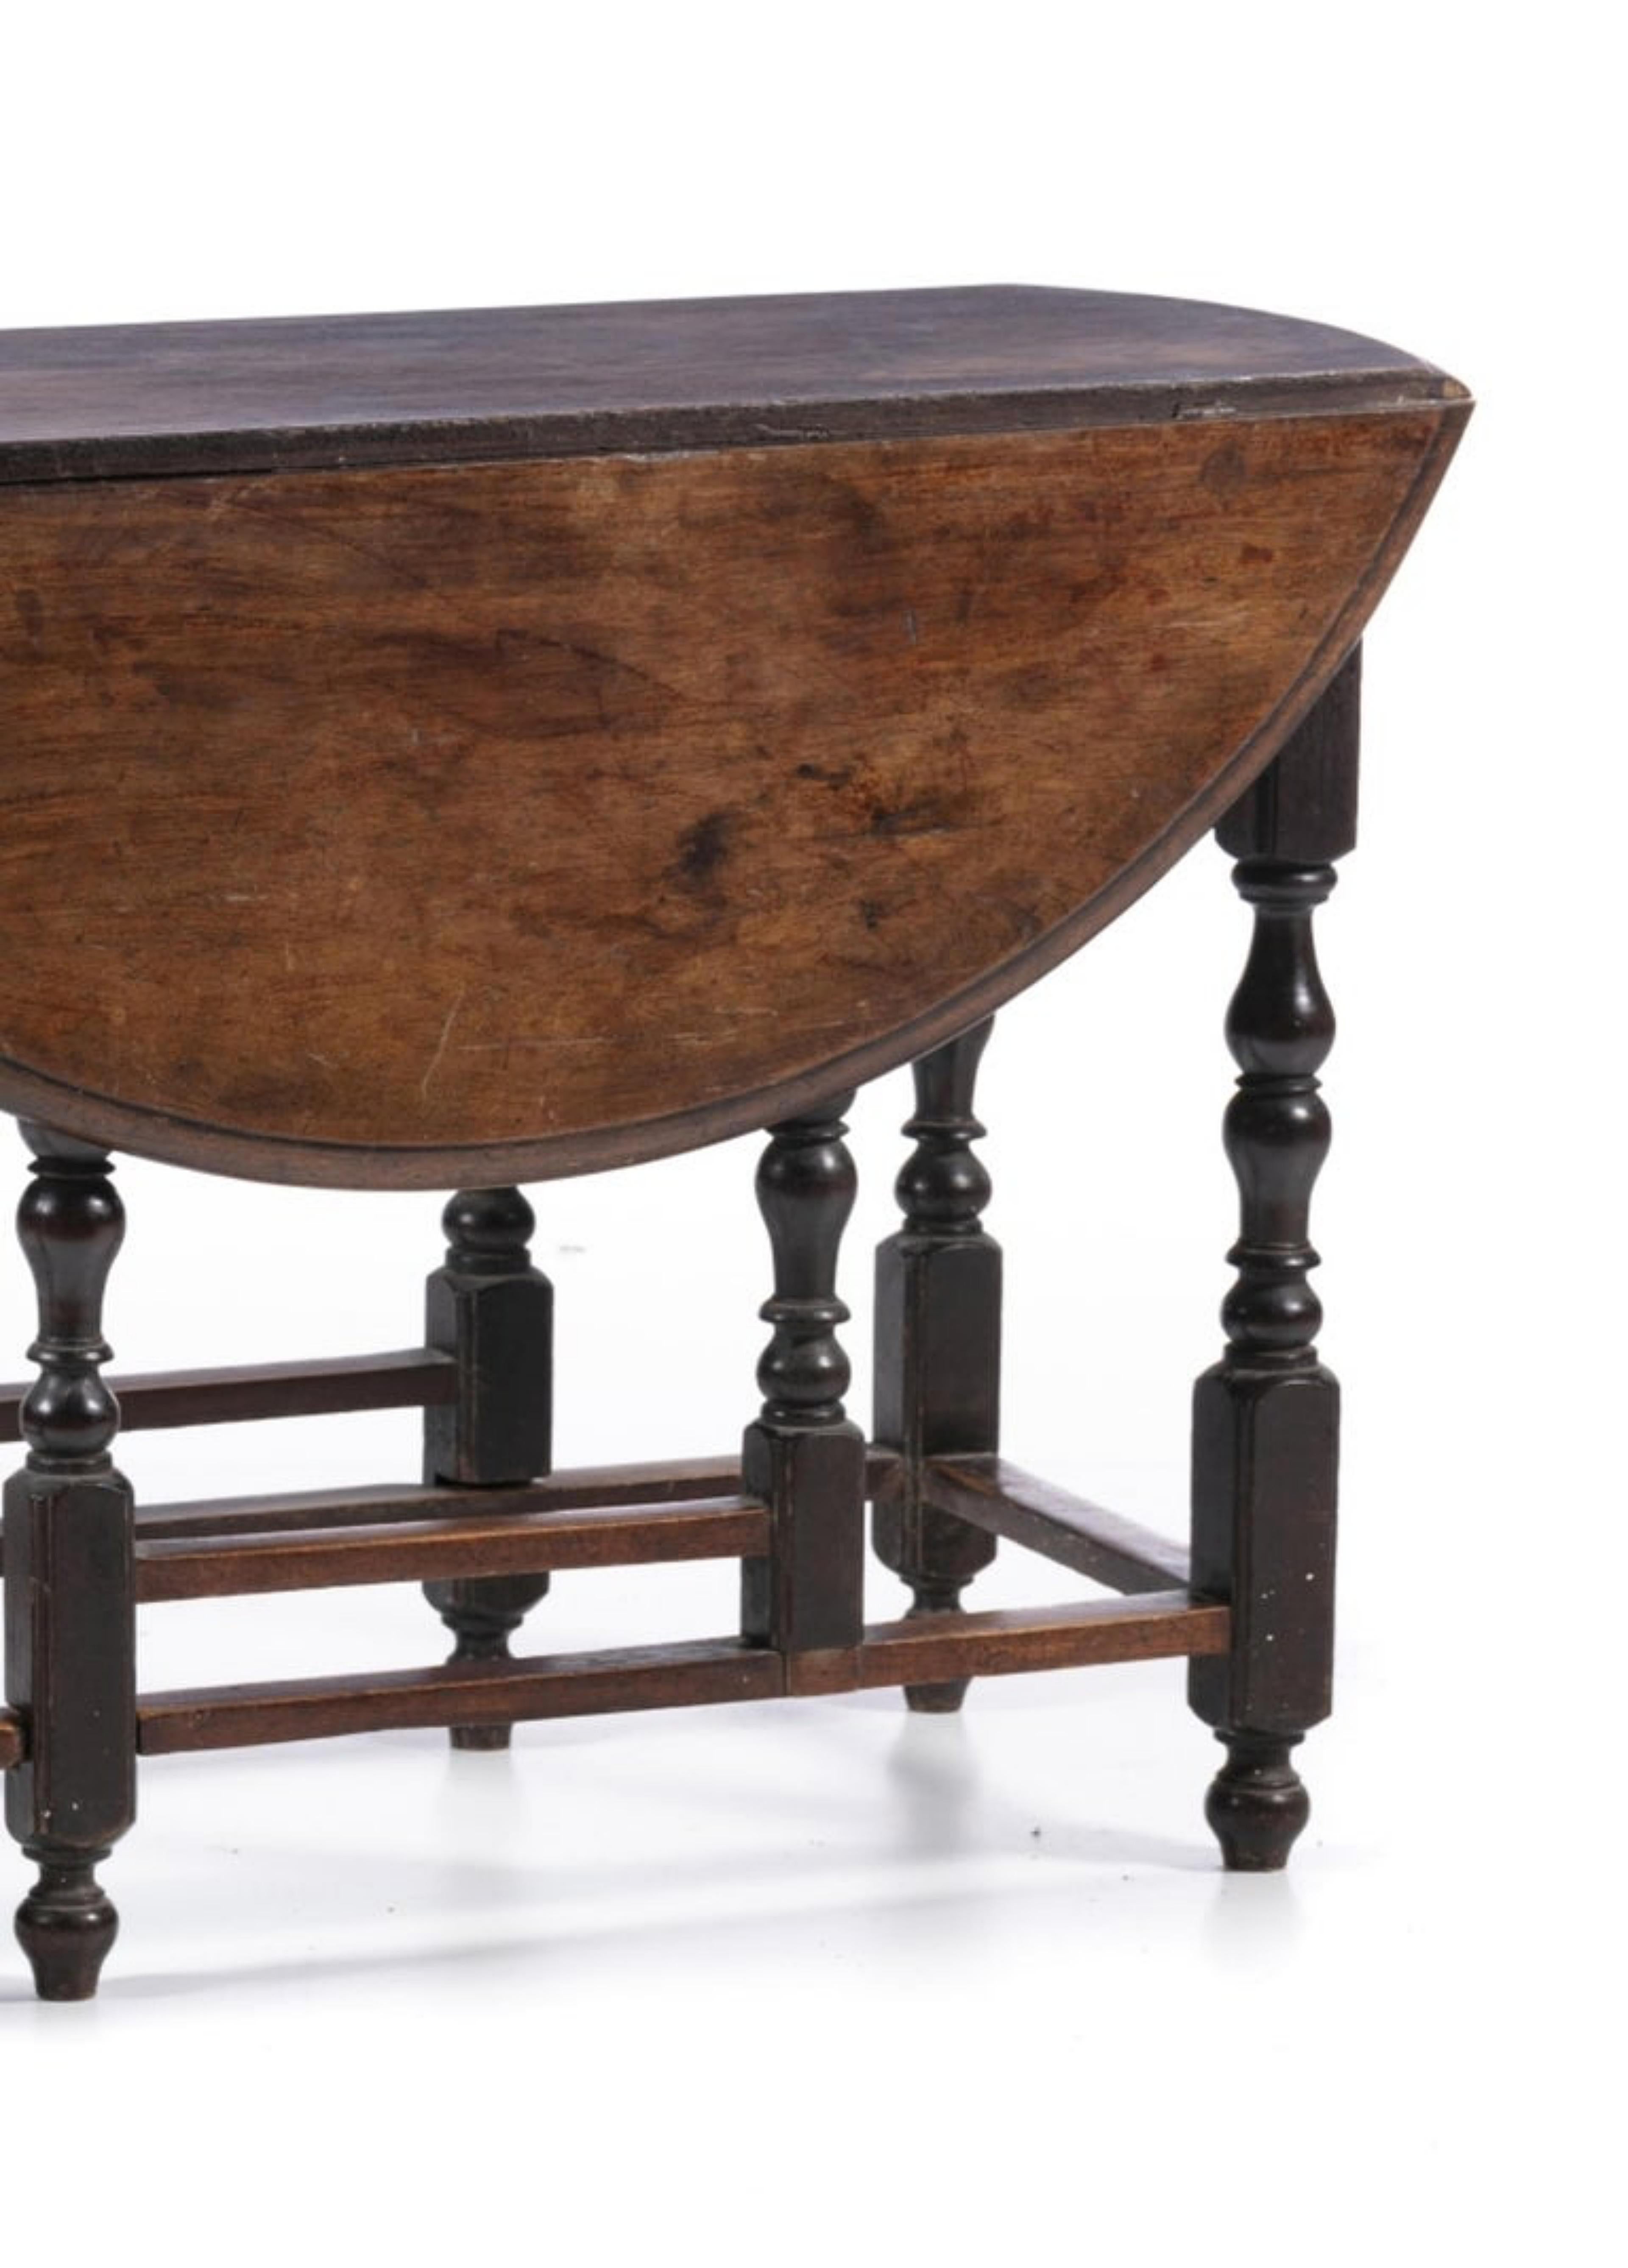 Hand-Crafted Portuguese Tab Table from the 17th Century For Sale